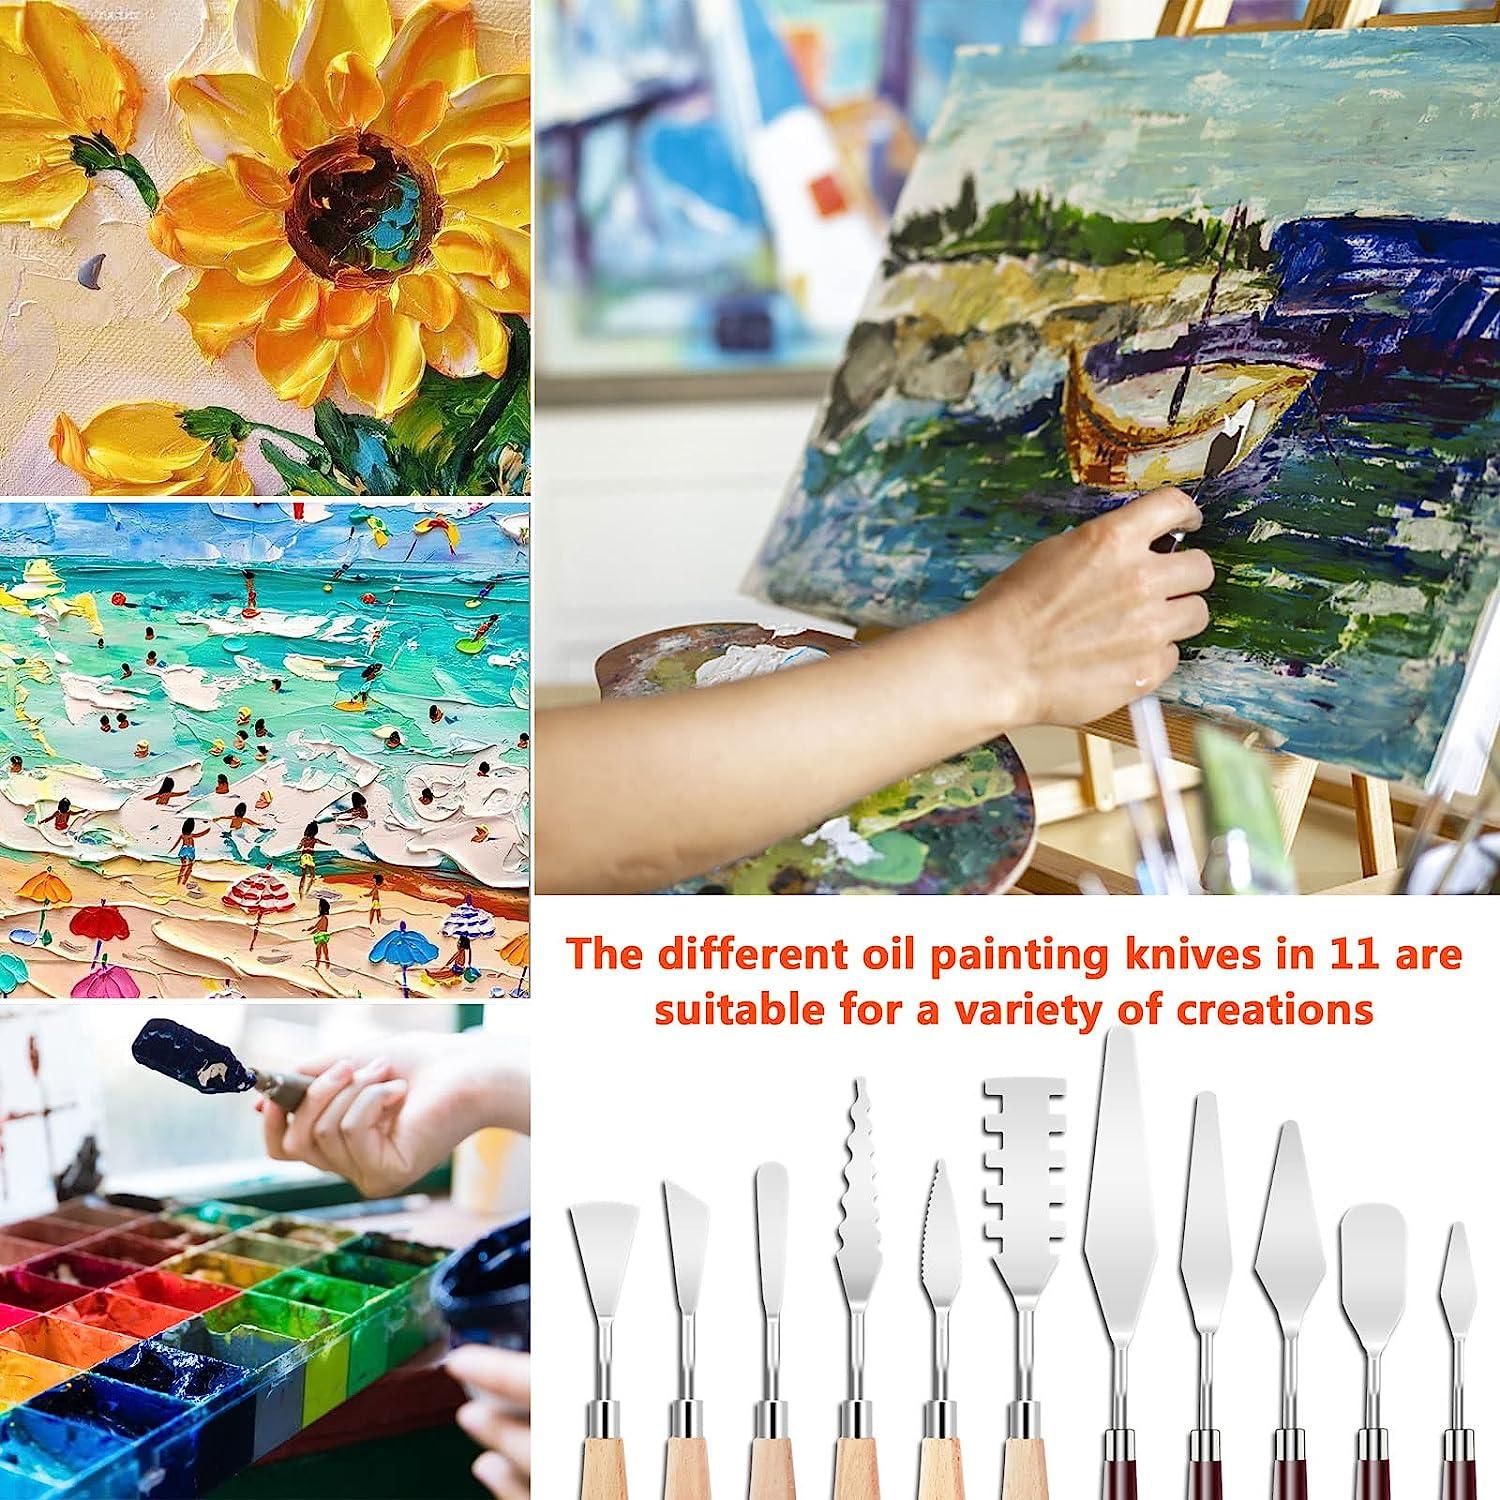 There are Palette Knives, and Then There are Painting Knives